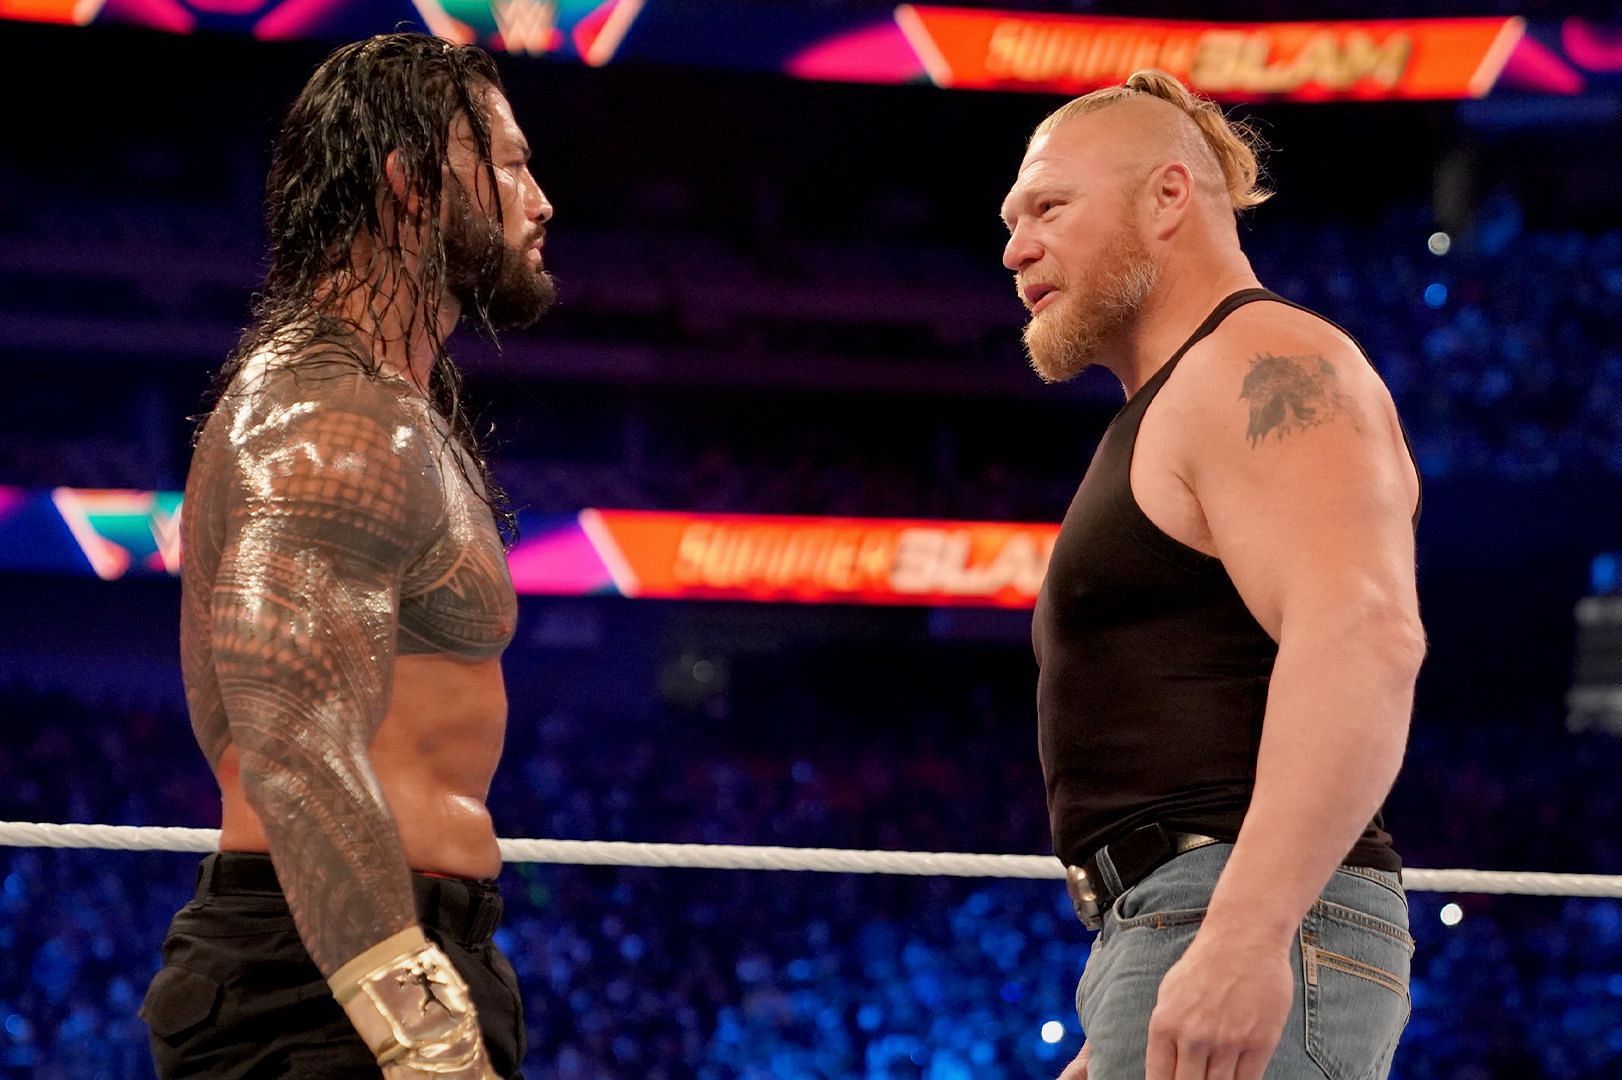 Roman Reigns vs. Brock Lesnar from Day 1 is officially off!